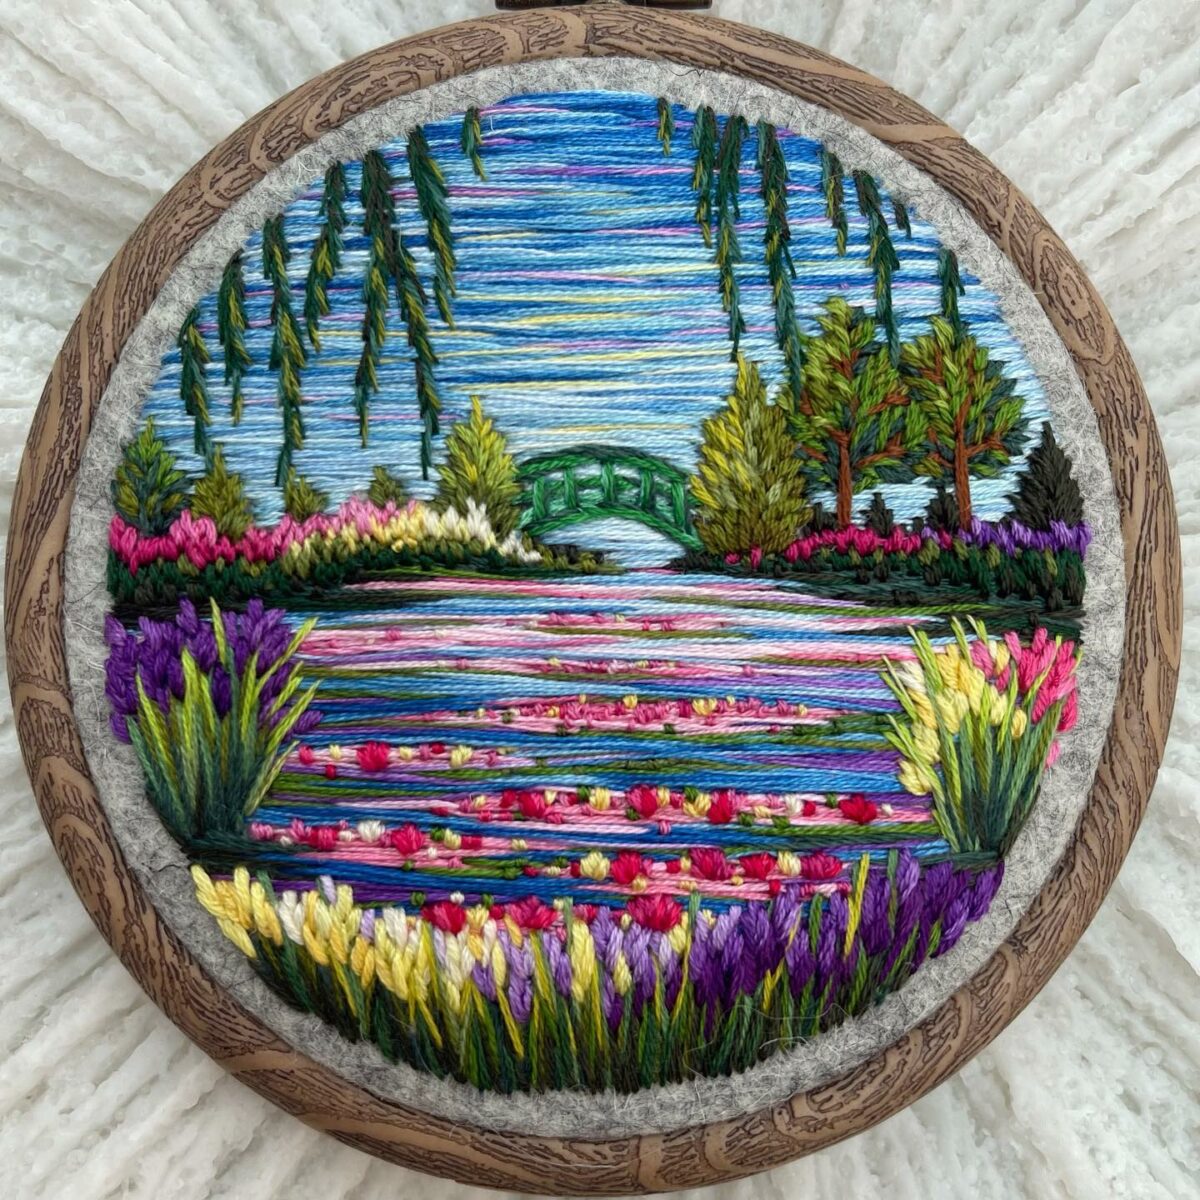 Gorgeous Embroidery Hoop Arts Of Natural Landscapes By Sew Beautiful 4